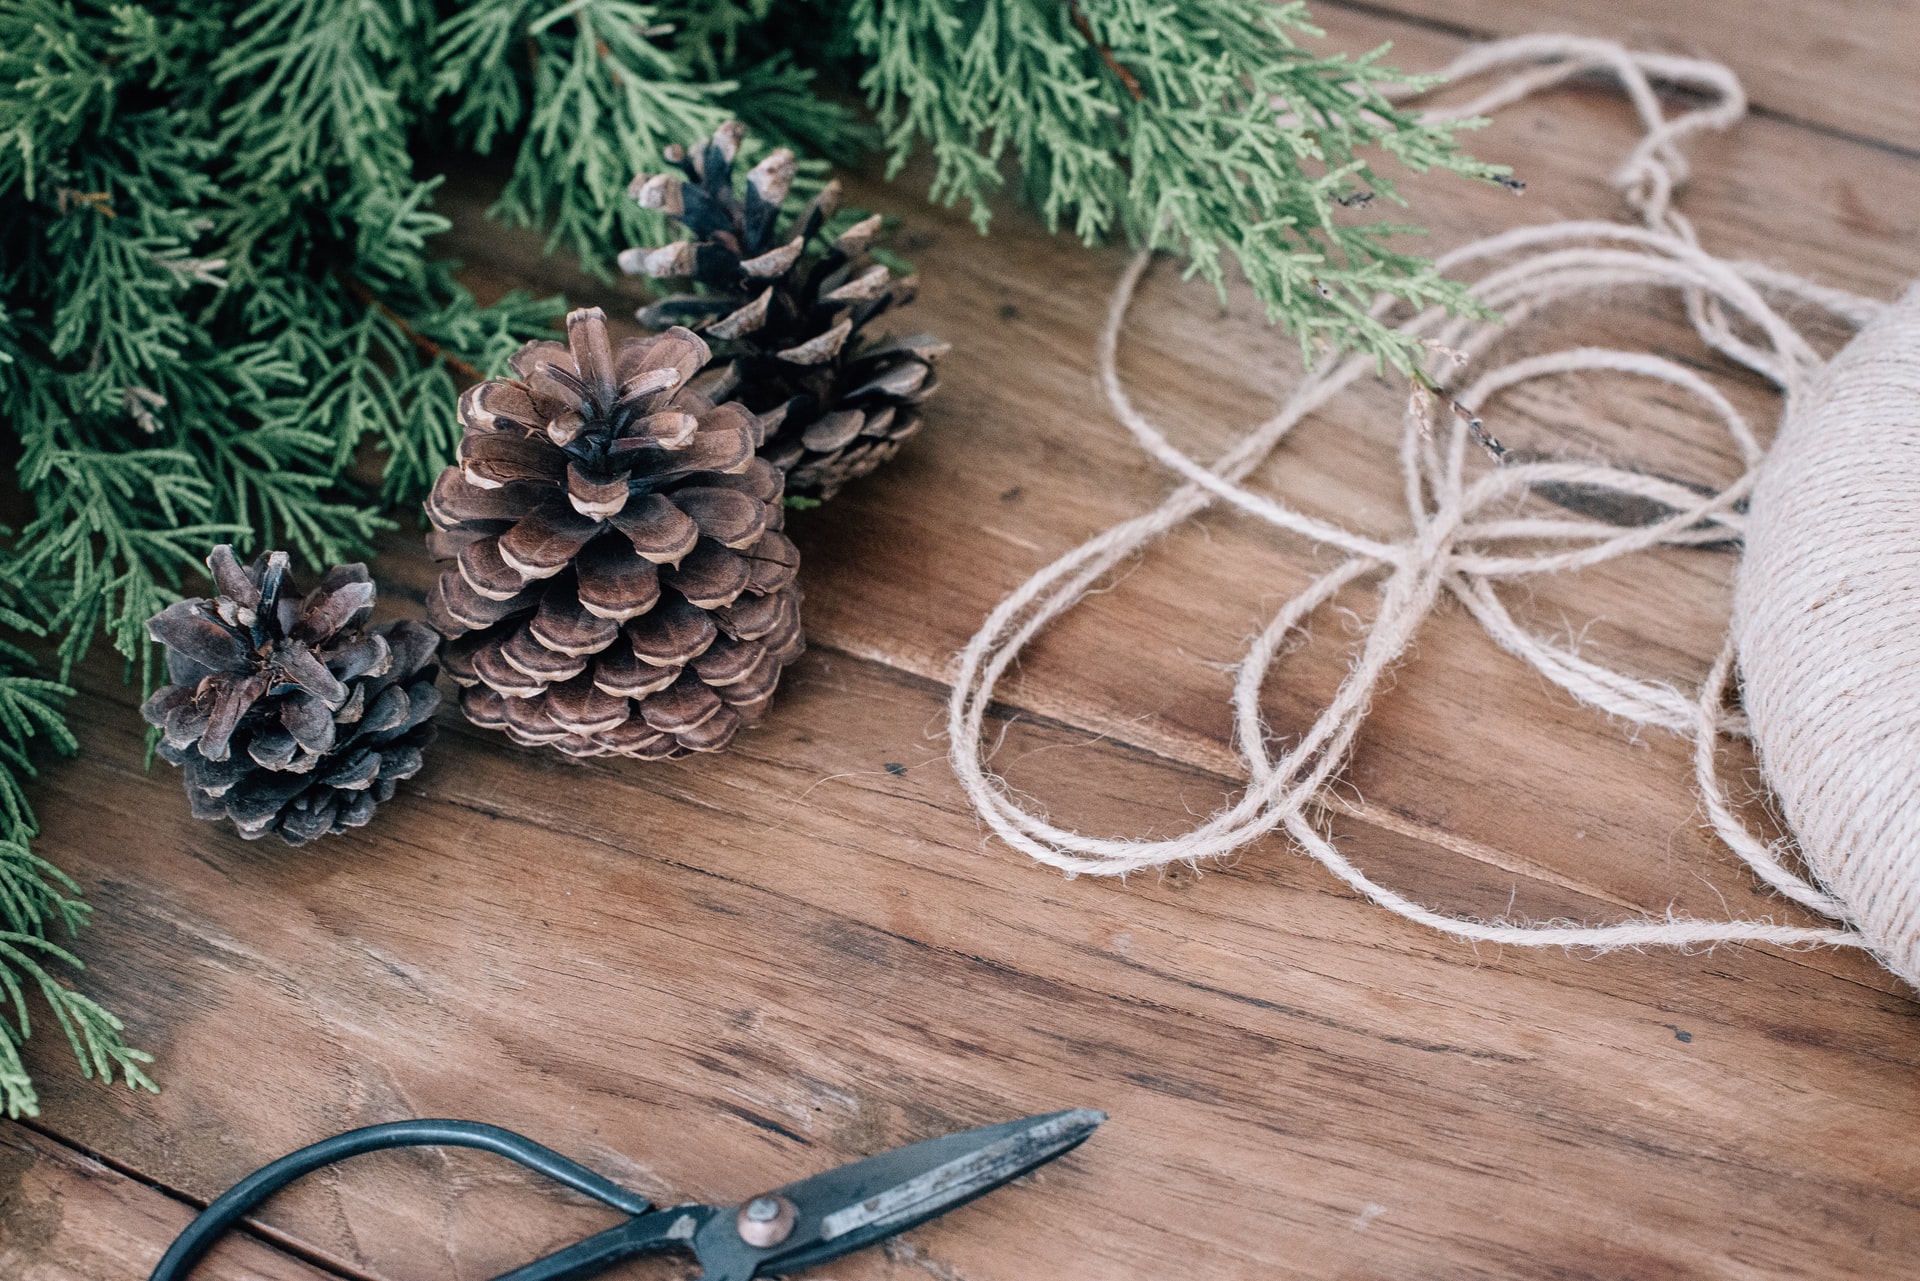 Unconventional Holiday Decor You Can DIY at Your Abingdon Apartment Today